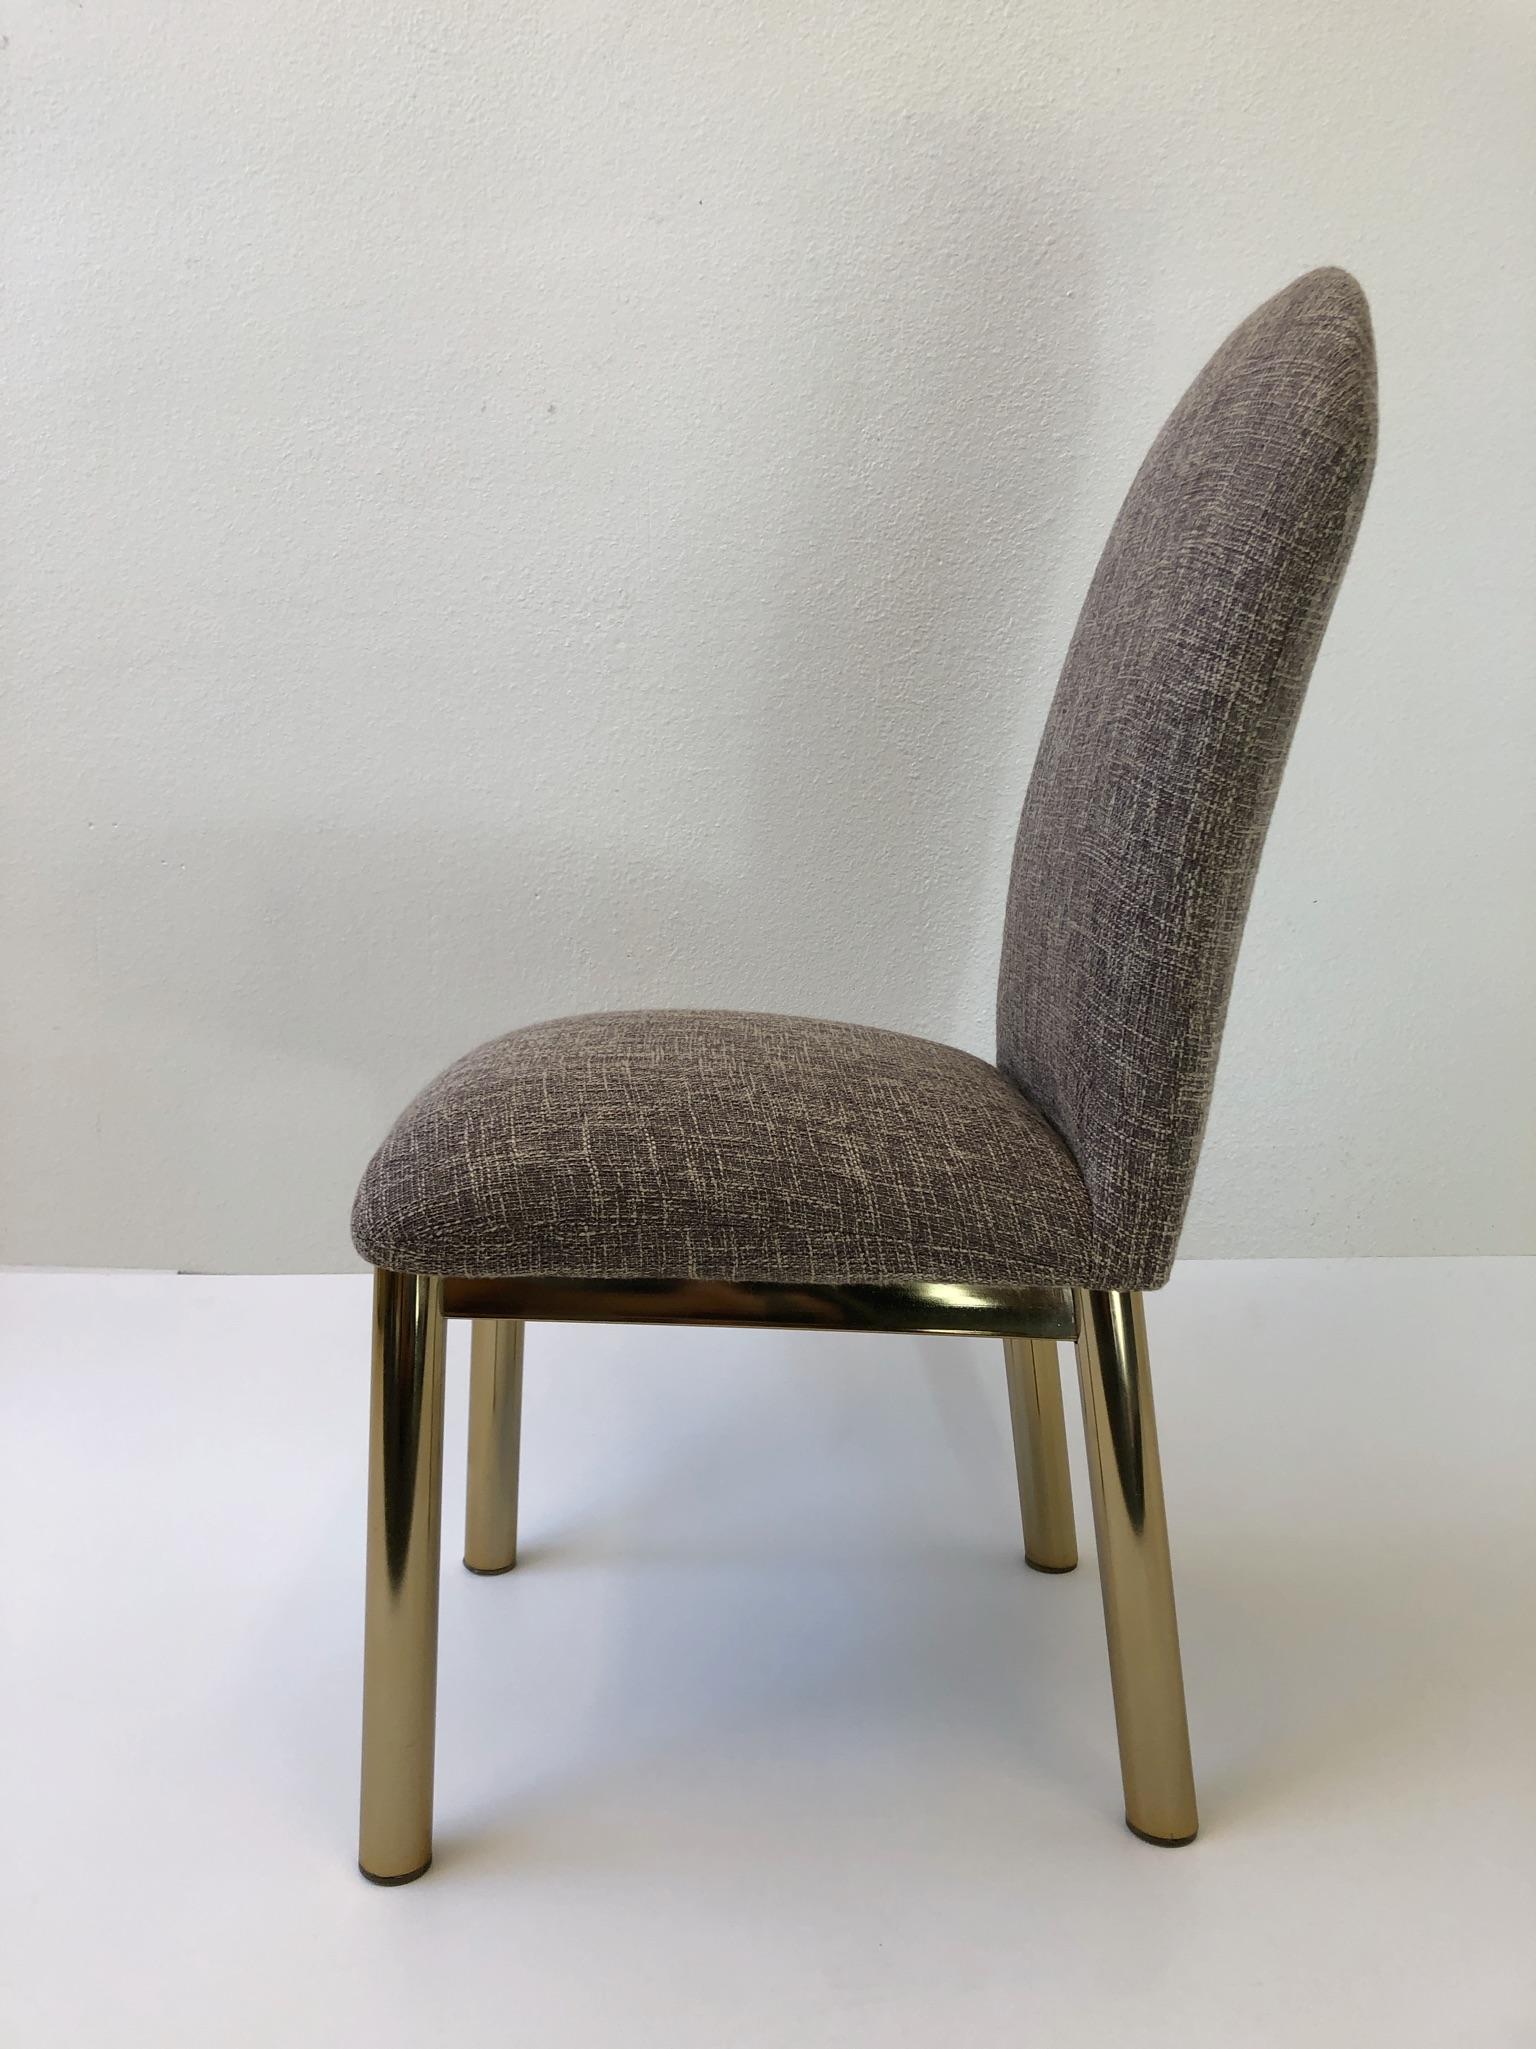 A glamorous set of six dining chairs from the 1970s. The chairs have been newly recovered in a beautiful light brown tweed fabric. The brass legs are in original condition, so they show minor wear.
Dimensions: 20” Wide, 24” deep, 39” high, 19”